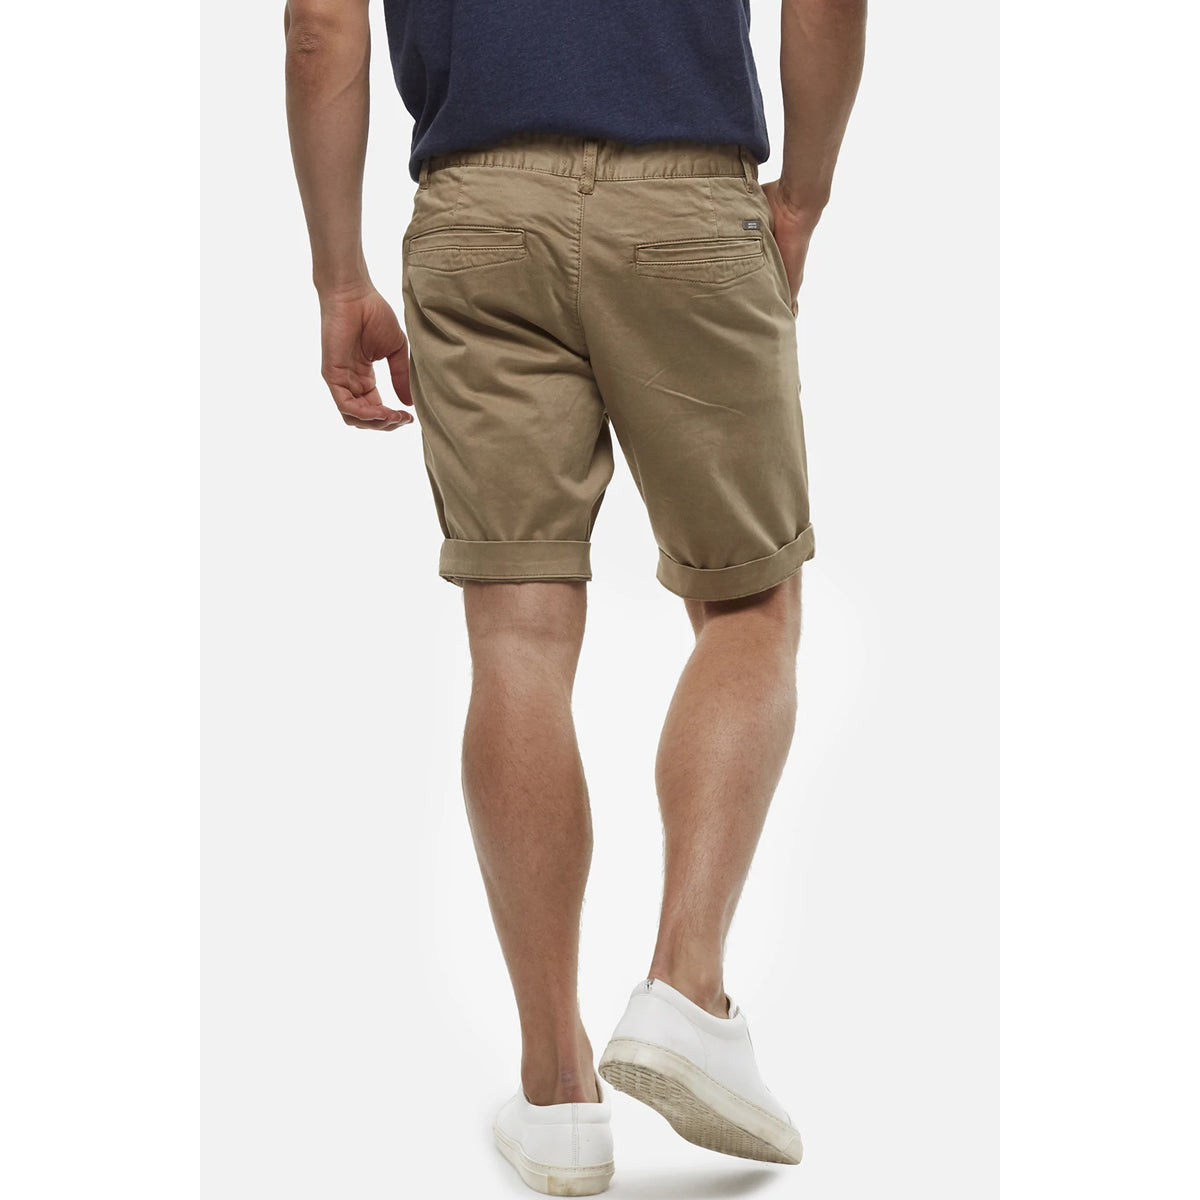 The Washed Cuba Short